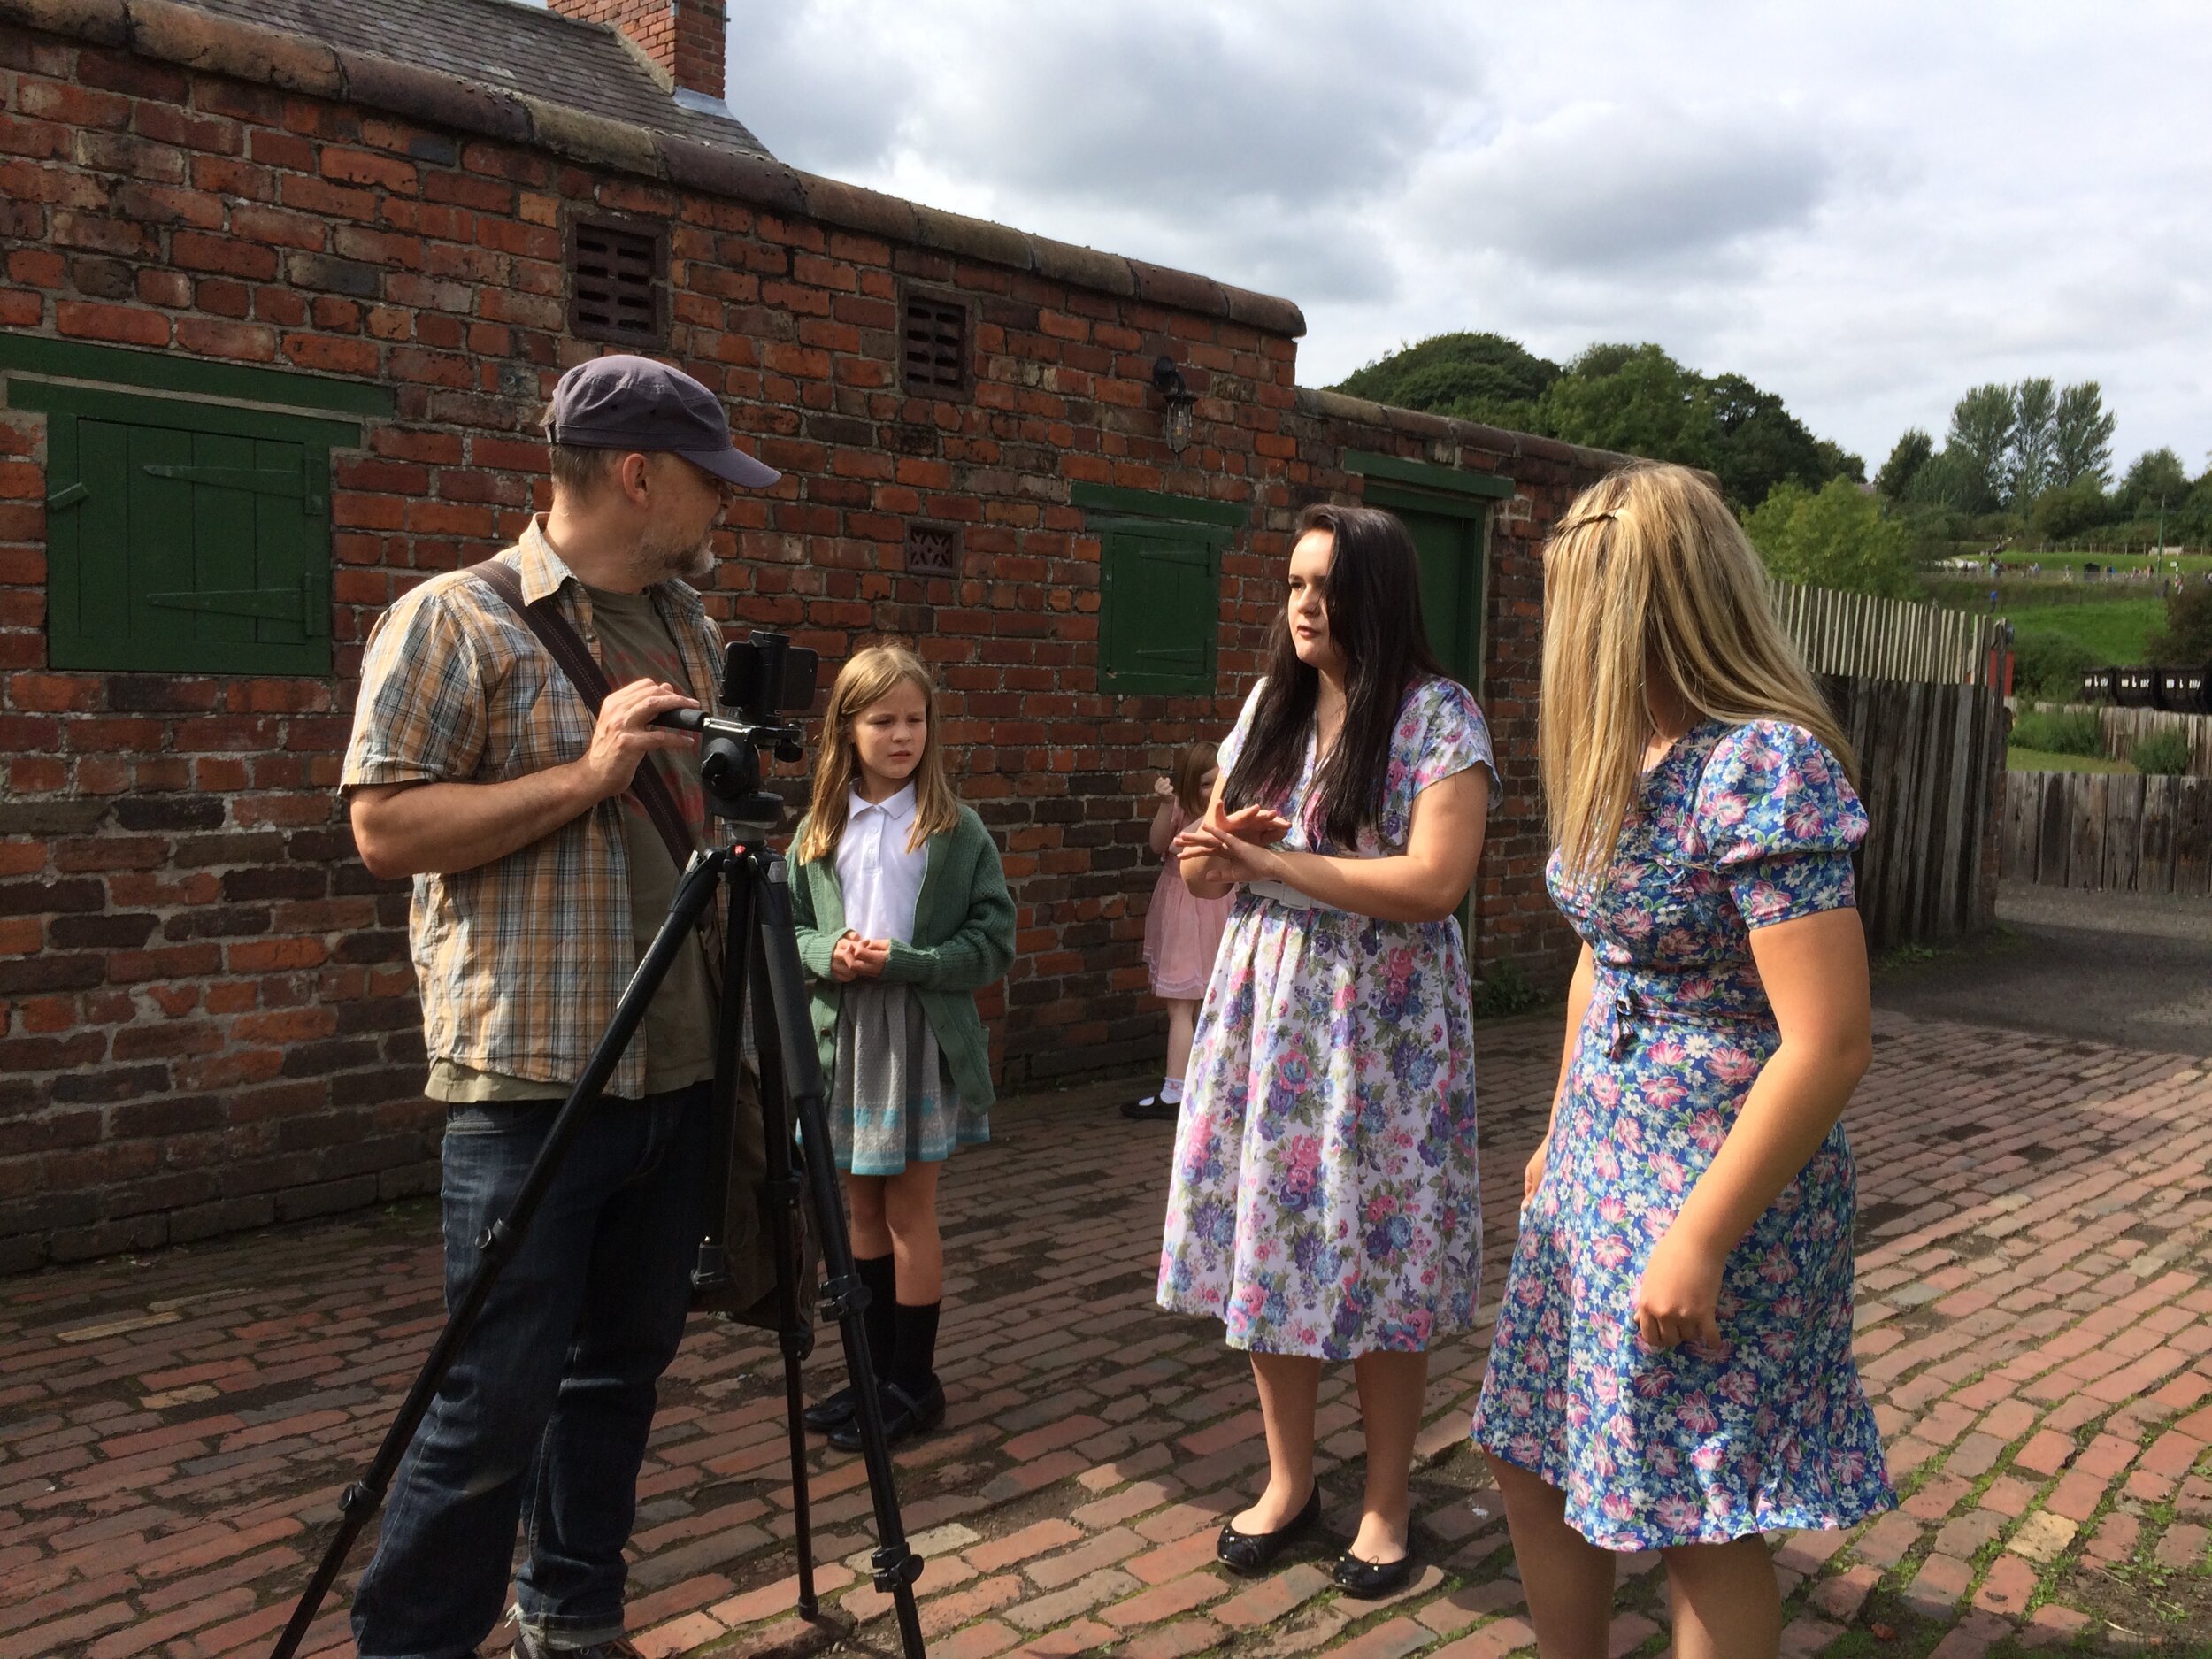 Another group of young people filming at Beamish